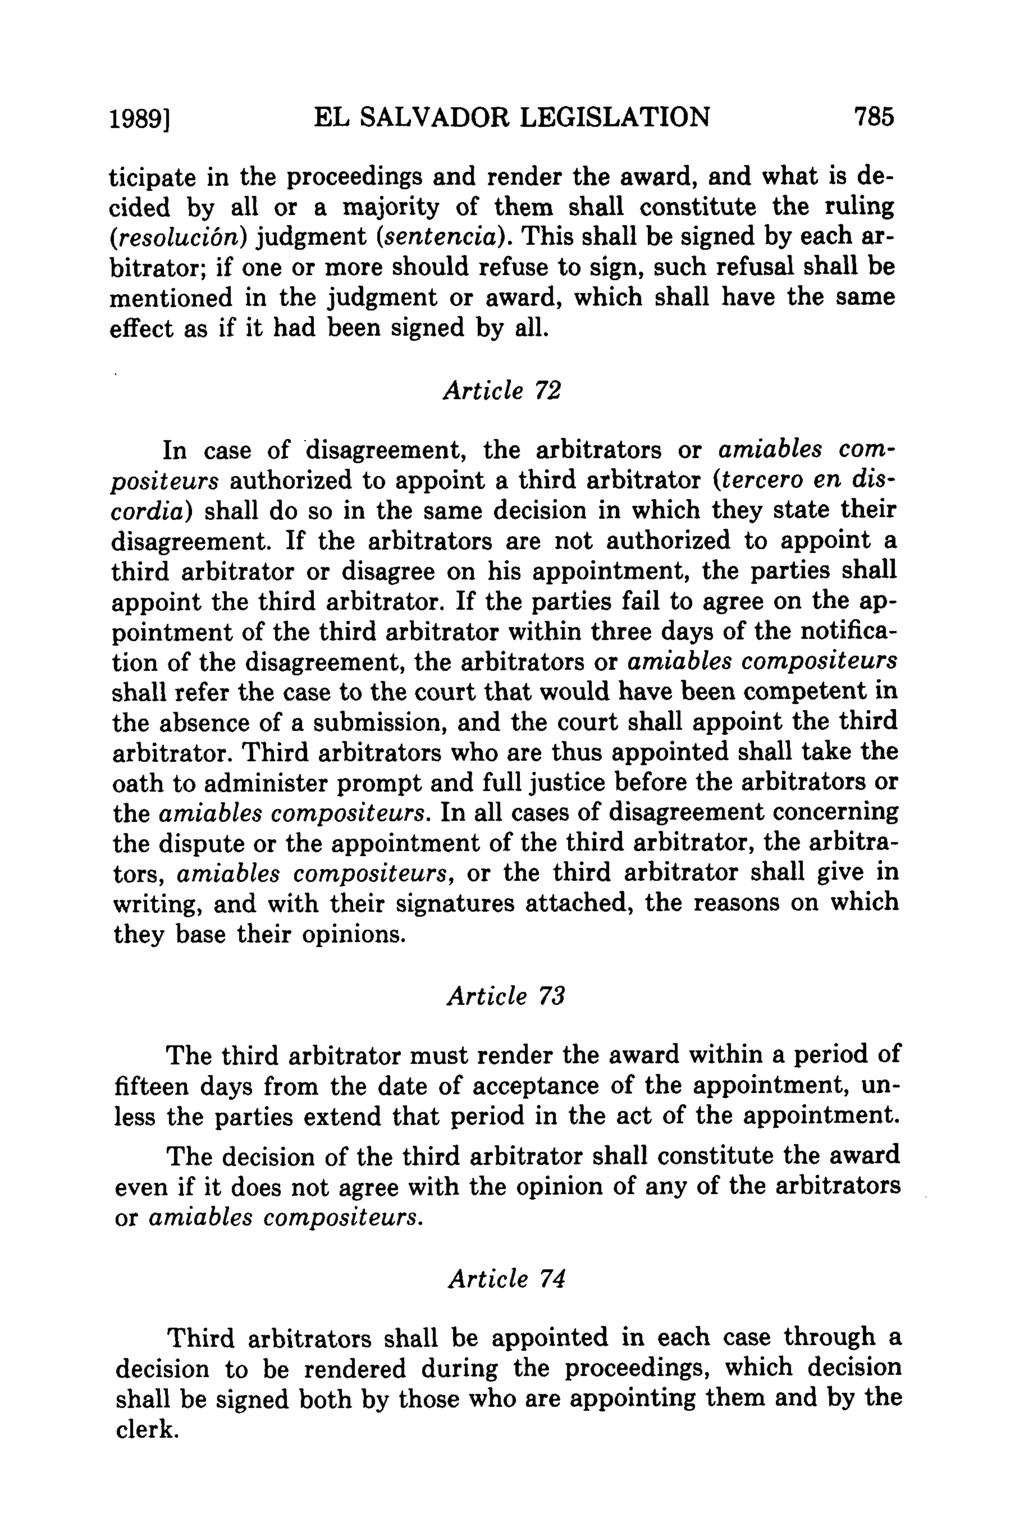 1989] EL SALVADOR LEGISLATION ticipate in the proceedings and render the award, and what is decided by all or a majority of them shall constitute the ruling (resoluci6n) judgment (sentencia).